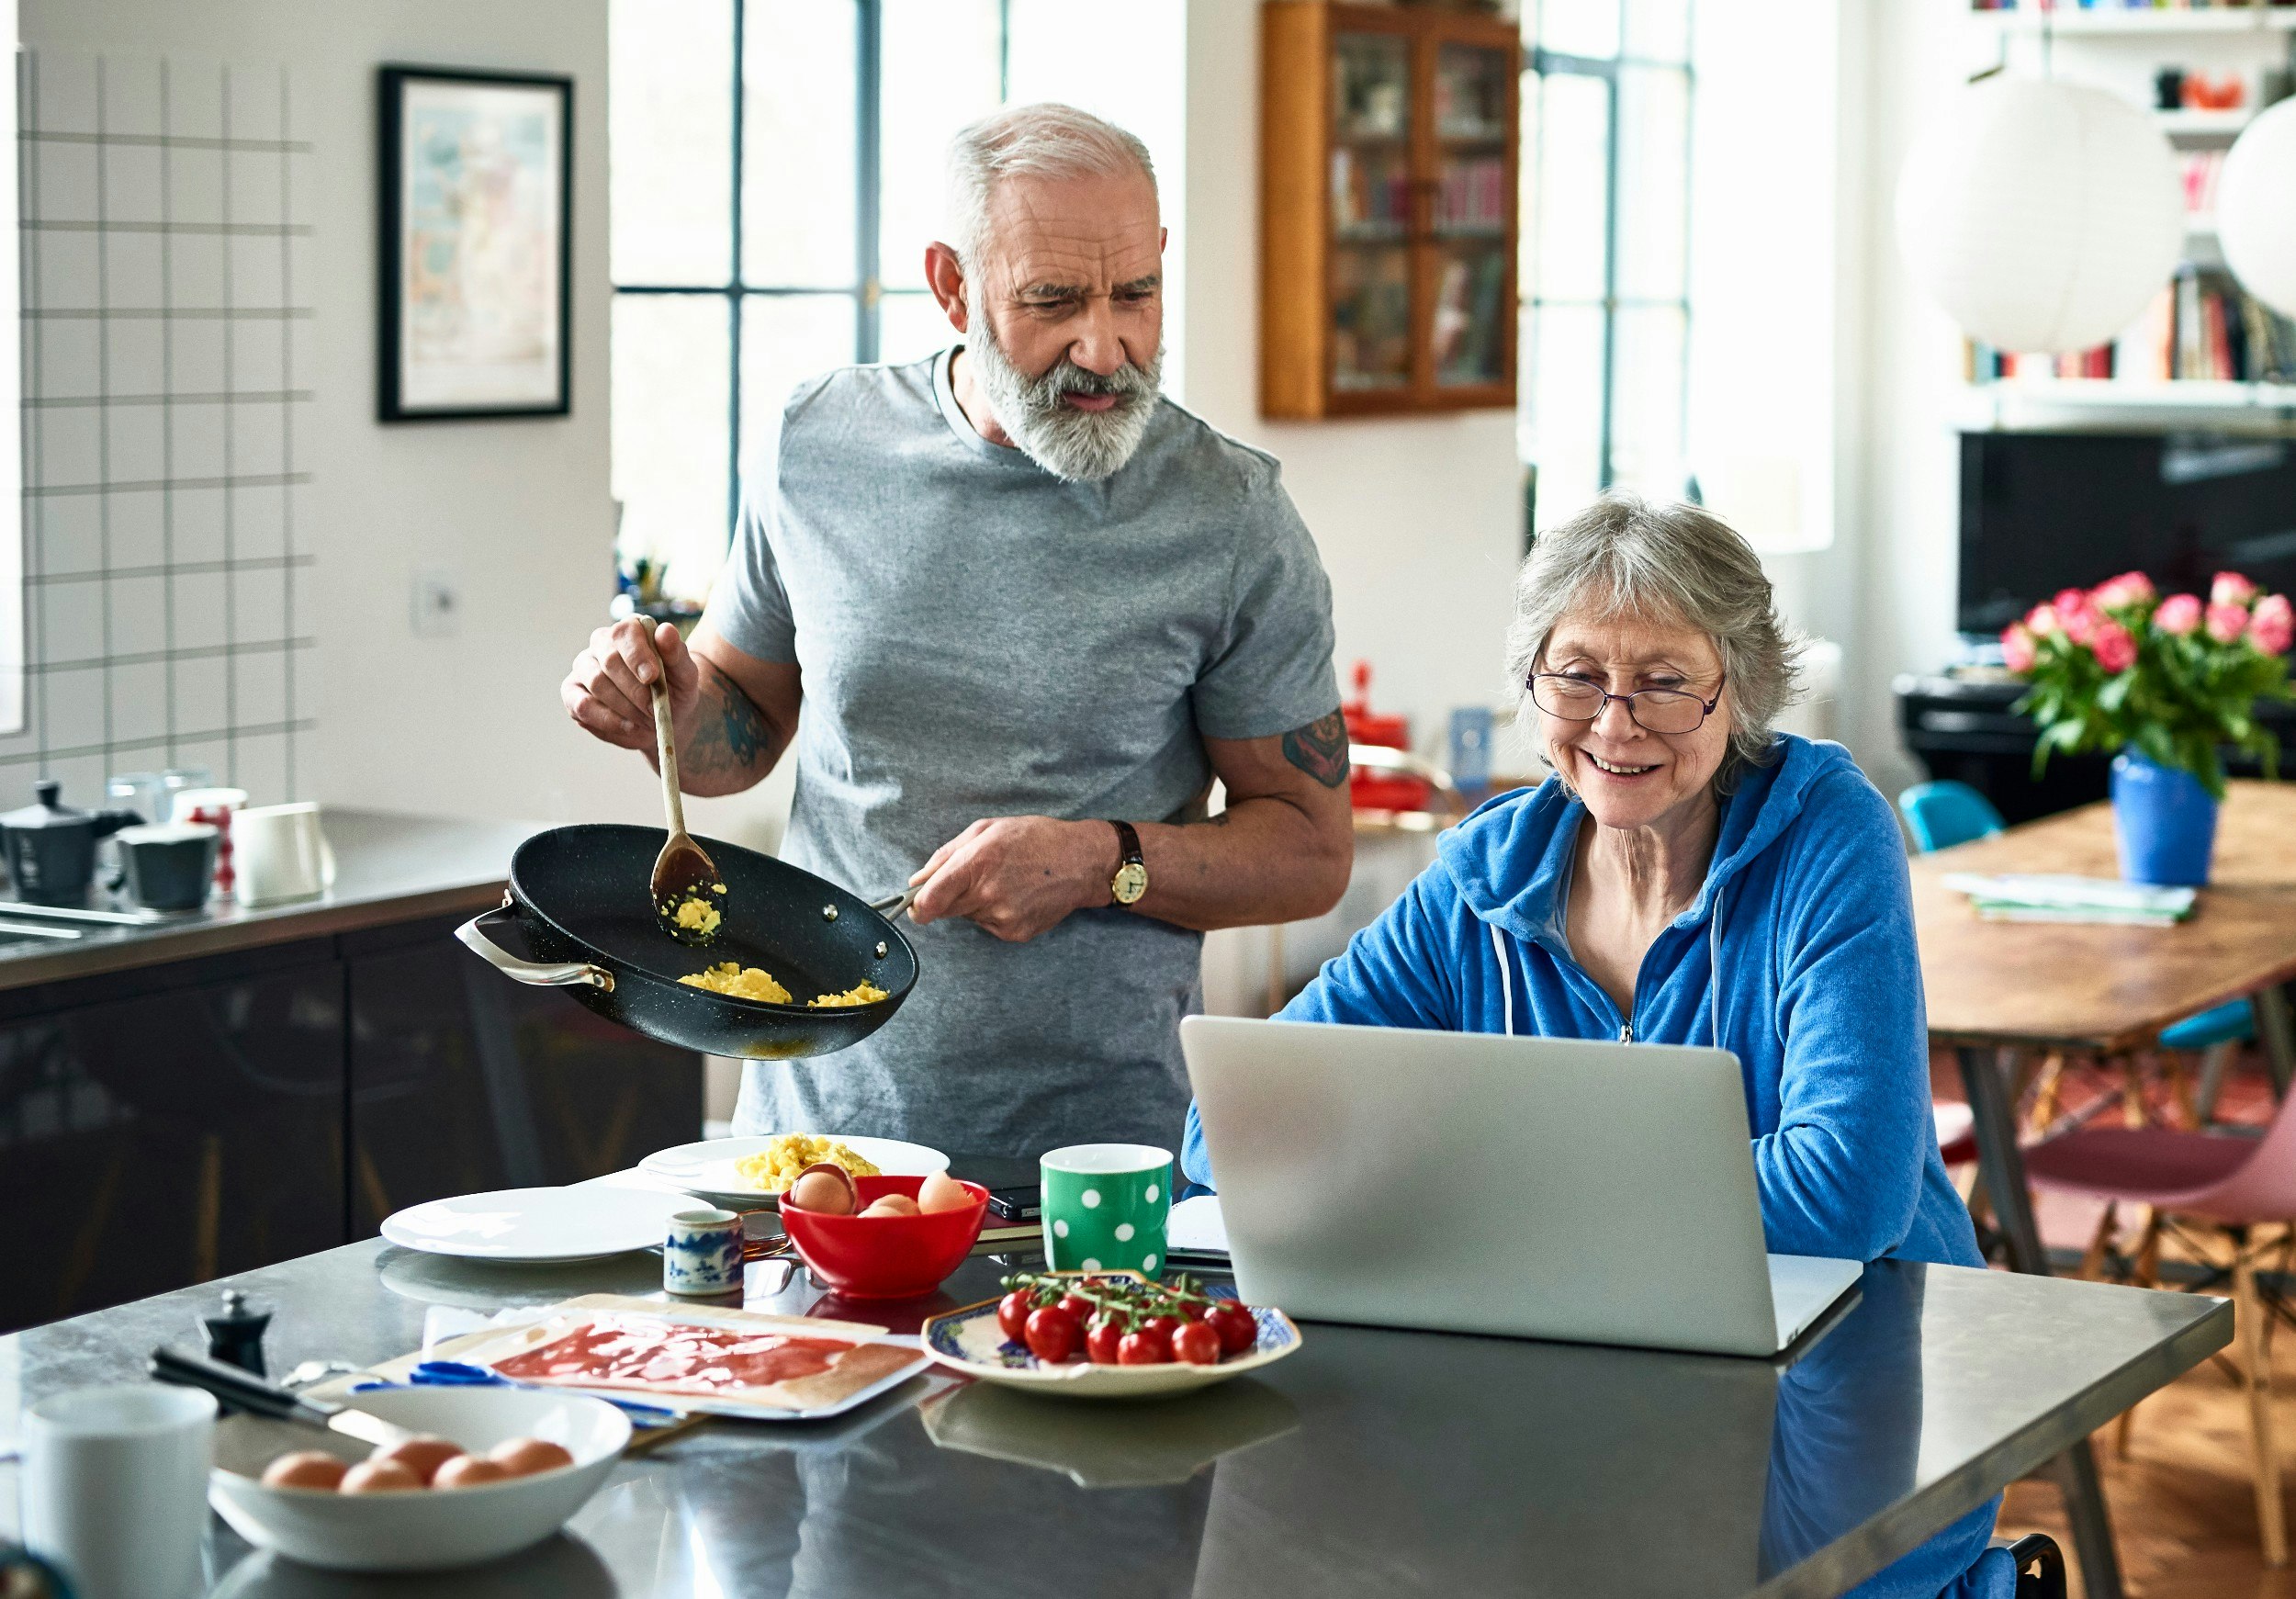 A senior man and woman cooking food and looking at a laptop